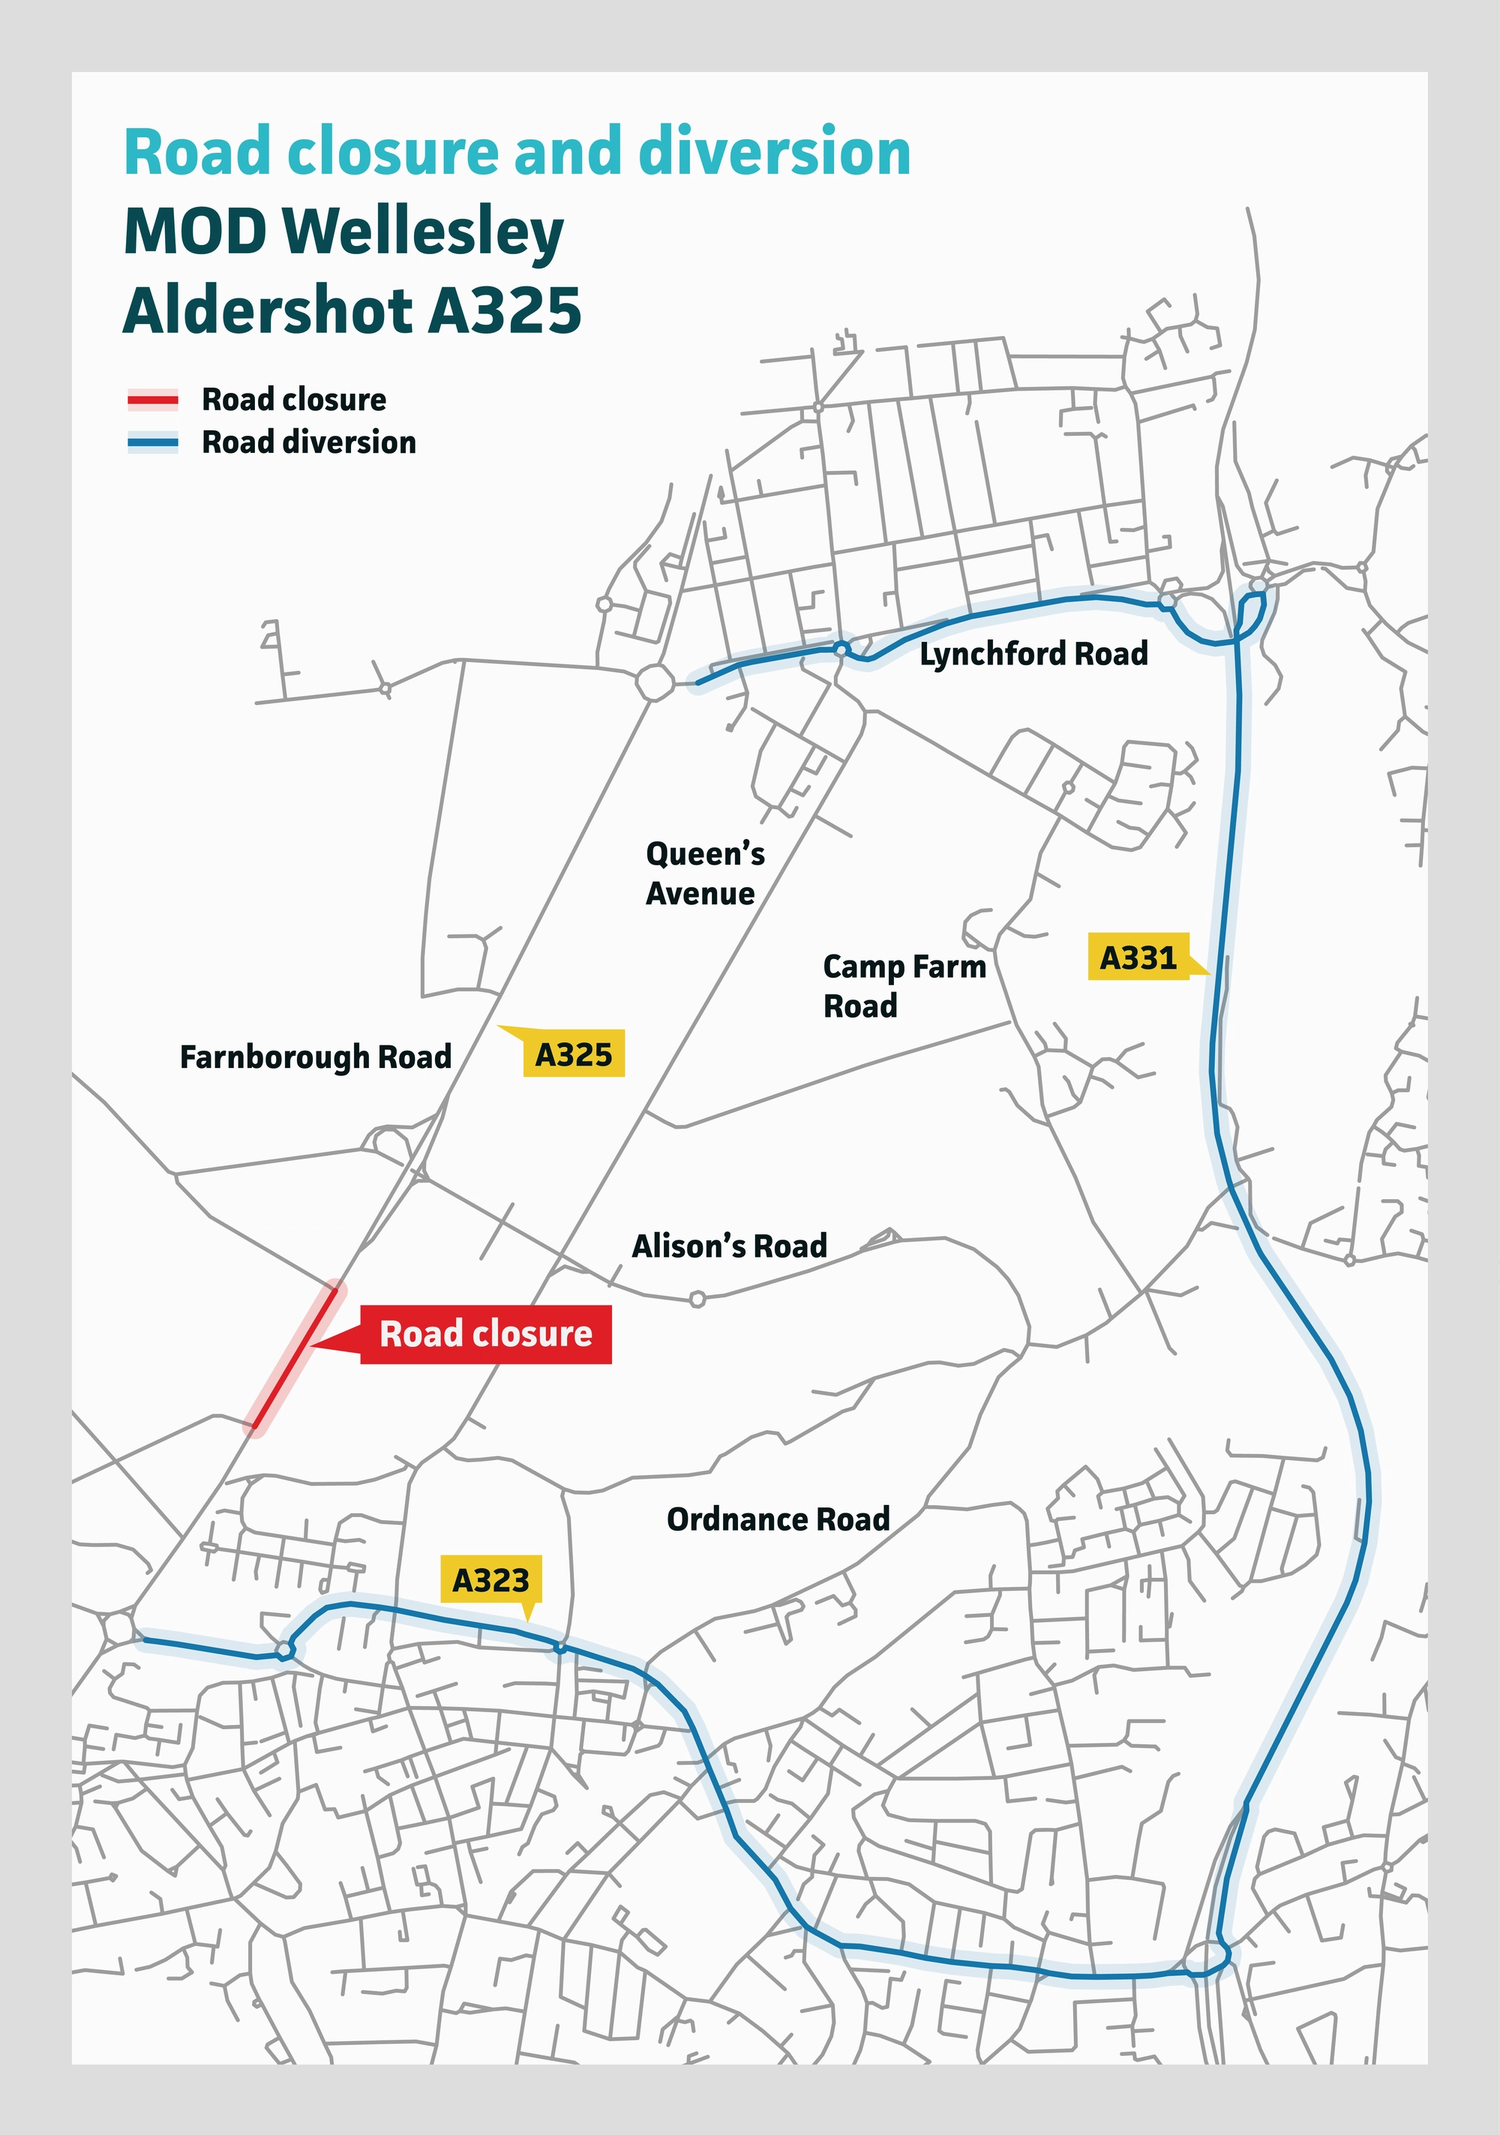 Map showing the road closure on Farnborough Road and diversion route